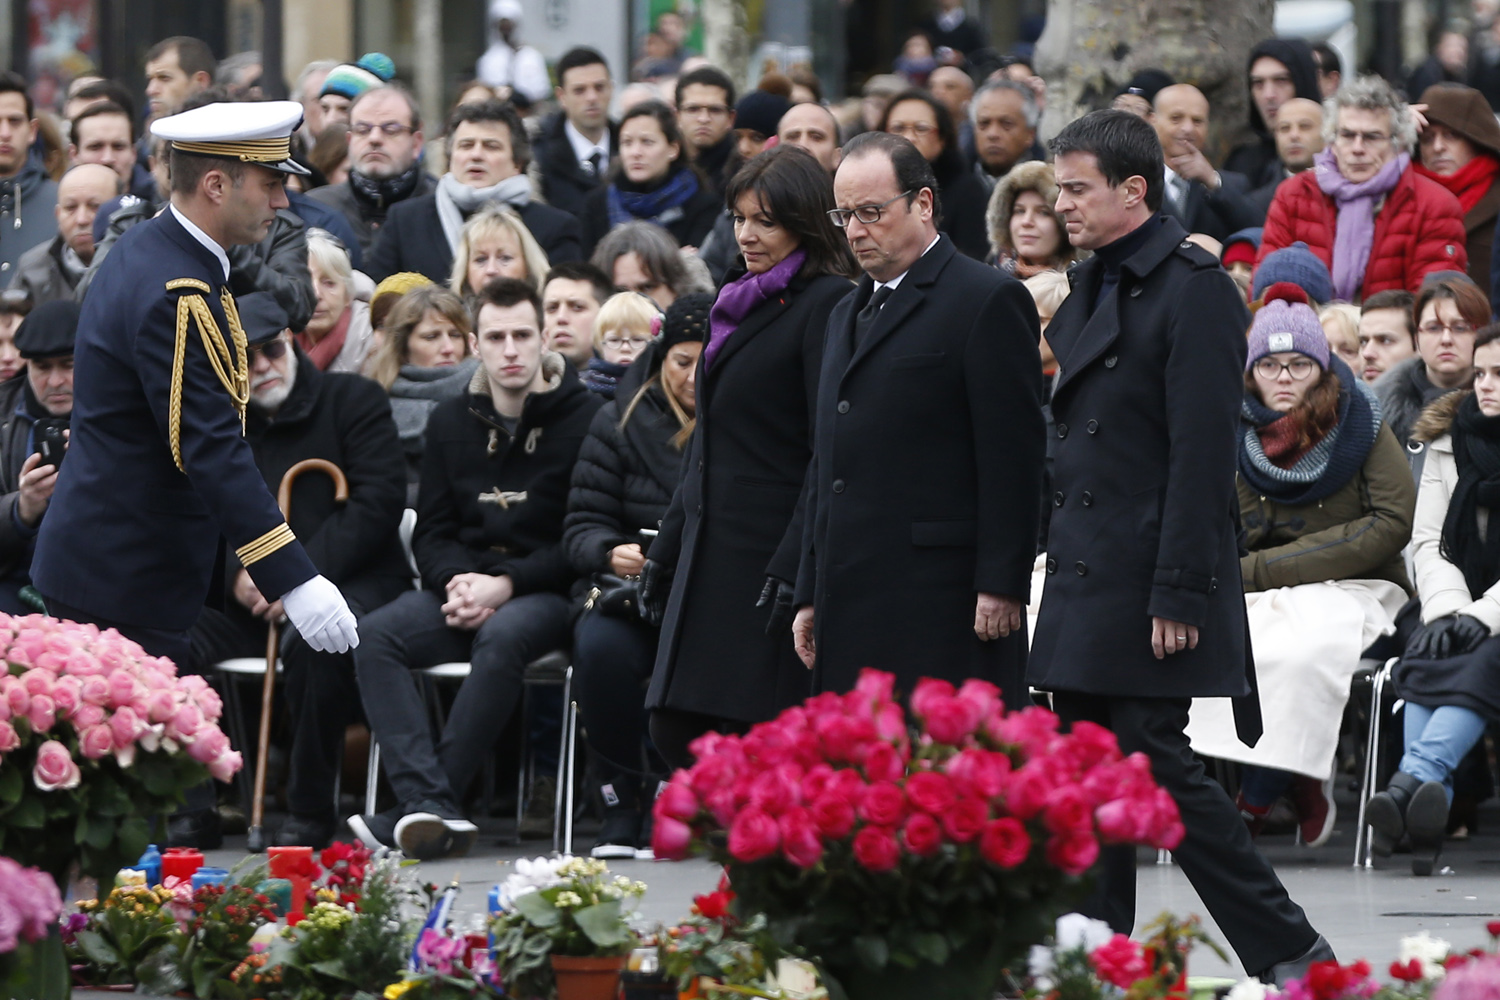 French Paris' mayor Anne Hidalgo (C), French President Francois Hollande (2ndR) and French Prime minister Manuel Valls (R) walk during a remembrance rally at Place de la Republique (Republic square) on January 10, 2016 in Paris, to mark a year since 1.6 million people thronged the French capital in a show of unity after attacks on the Charlie Hebdo newspaper and a Jewish supermarket. Just as it was last year, the vast Place de la Republique will be the focus of the gathering as people reiterate their support for freedom of expression and remember the other victims of what would become a year of jihadist outrages in France, culminating in the November 13 coordinated shootings and suicide bombings that killed 130 people and were claimed by the Islamic State (IS) group. AFP PHOTO / THOMAS SAMSON / AFP / THOMAS SAMSON